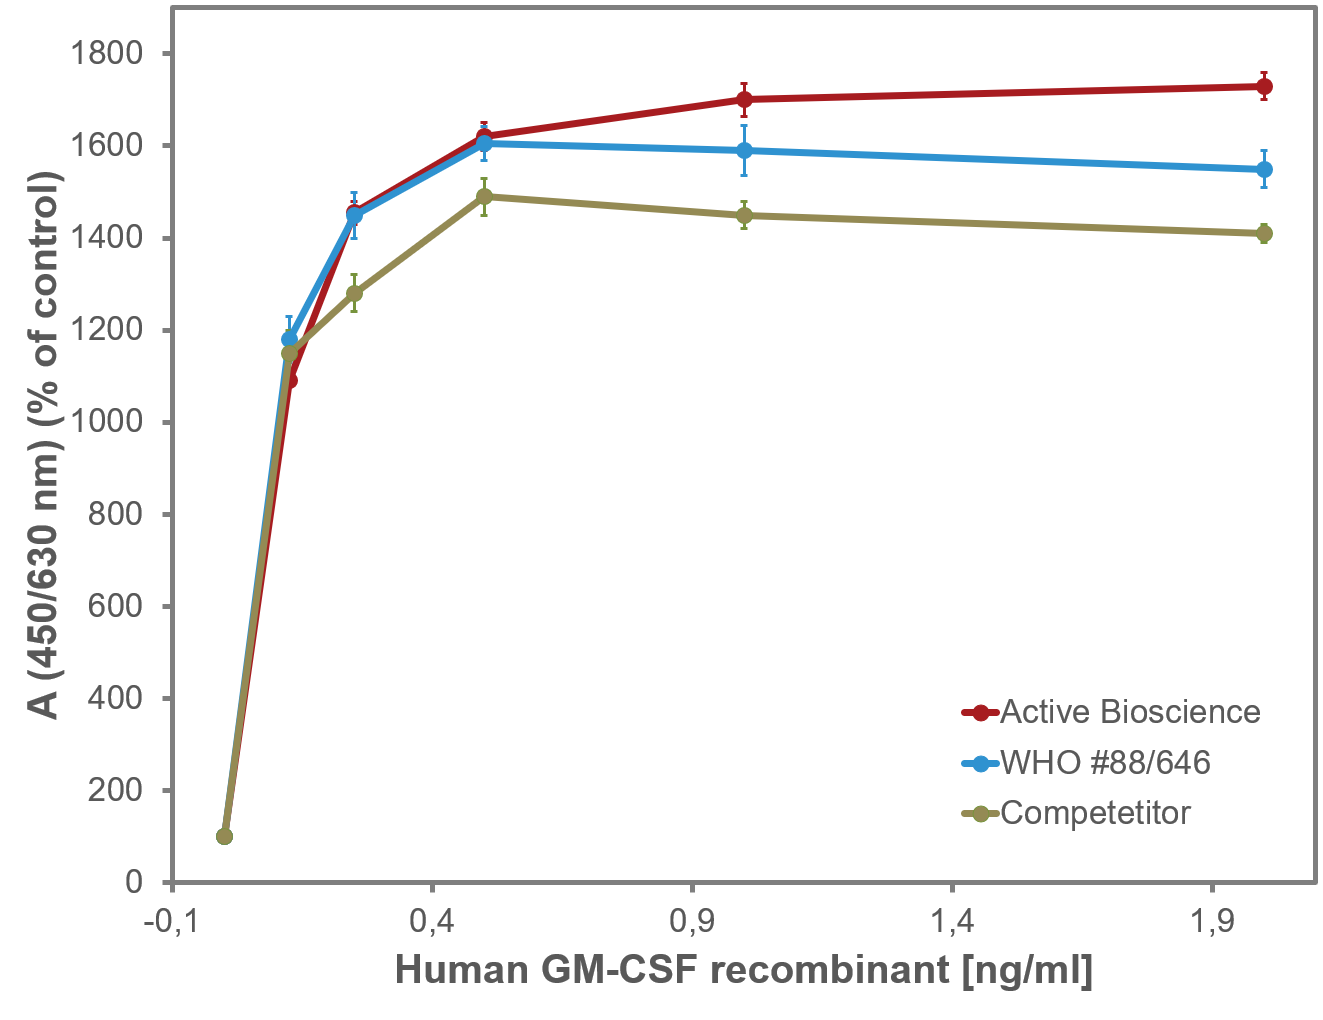 Fig. 2: Dose-dependent stimulation of cell proliferation in TF-1 cells by recombinant Human GM-CSF, cct-premium and the WHO standard 88/646. Values are the means (�SD) of triplicate determinations and expressed as percentage of control.